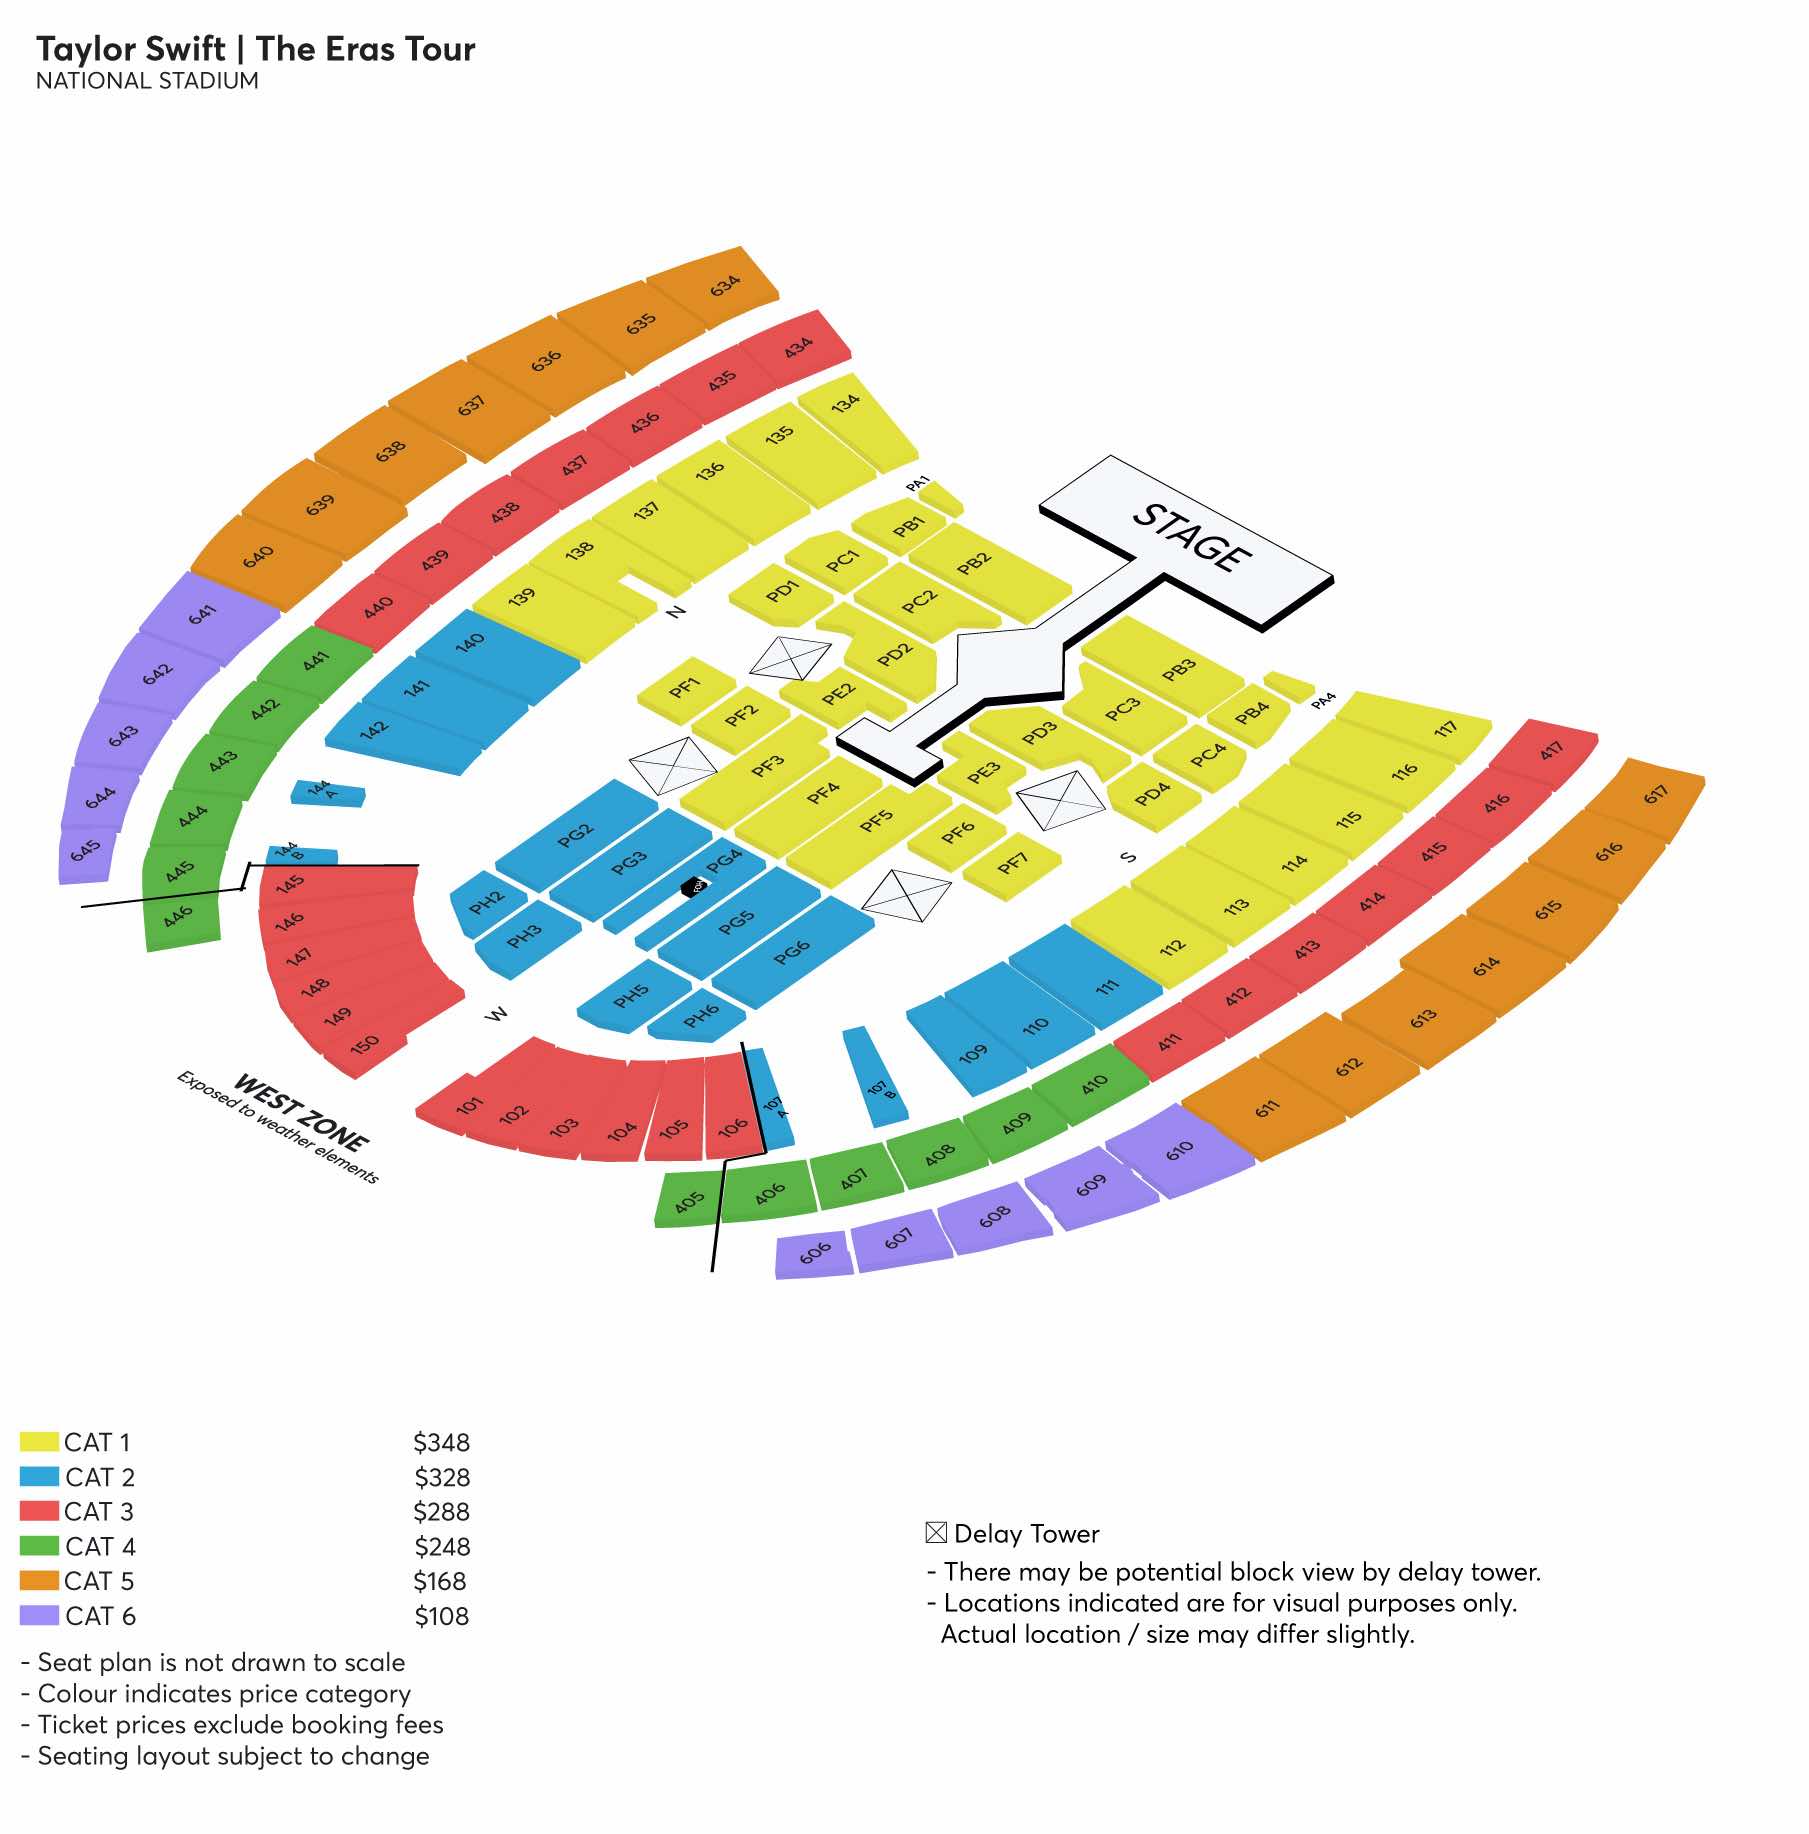 Attention, Swifties The seat plan for Taylor Swift’s ‘Eras’ stop in